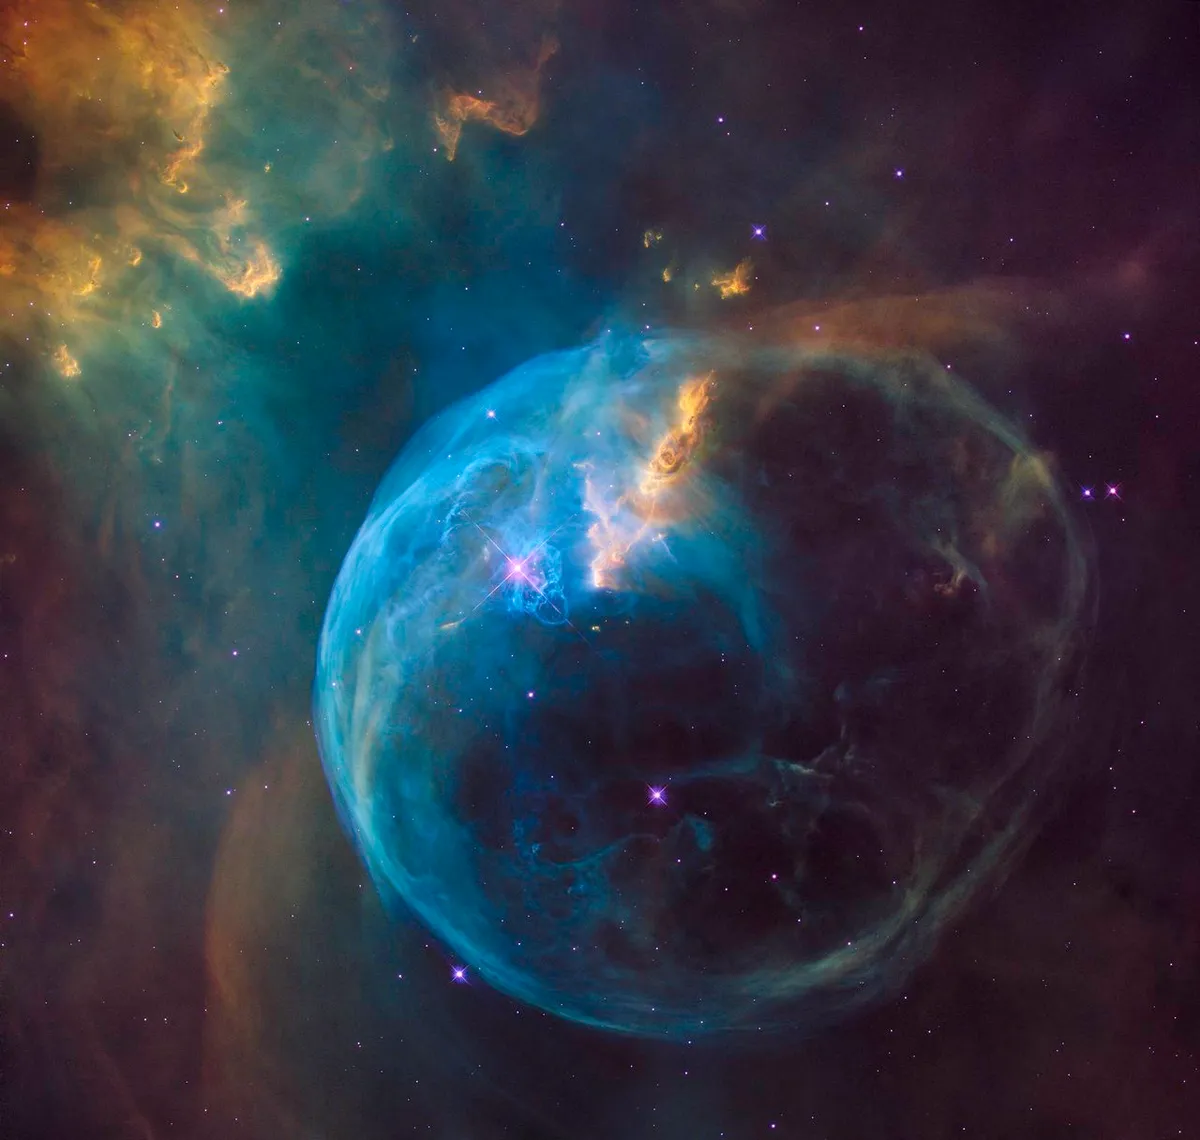 Bubble Nebula 21 April 2016. An expanding shell of gas 10 lightyears across and expanding at the rate of 100,000km an hour. Credit: NASA, ESA, Hubble Heritage Team